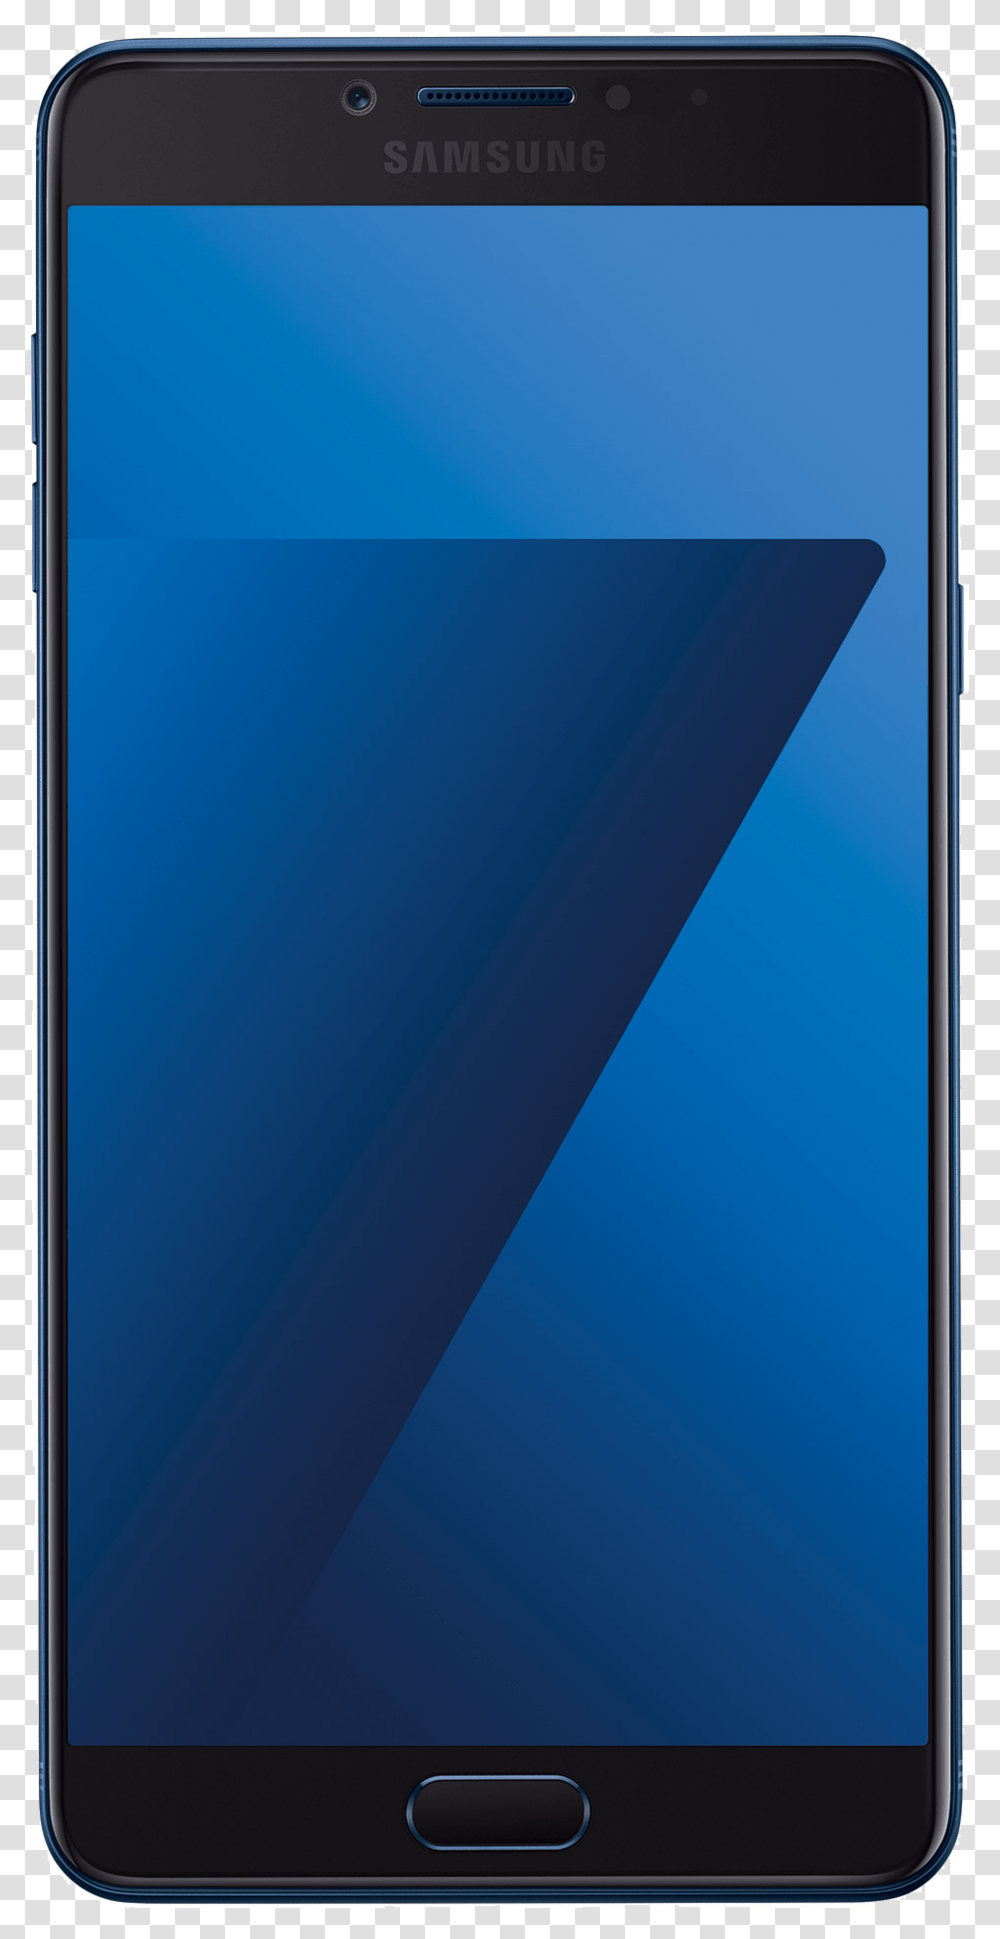 Samsung Phone Samsung Galaxy C7 Pro, Mobile Phone, Electronics, Cell Phone, Iphone Transparent Png